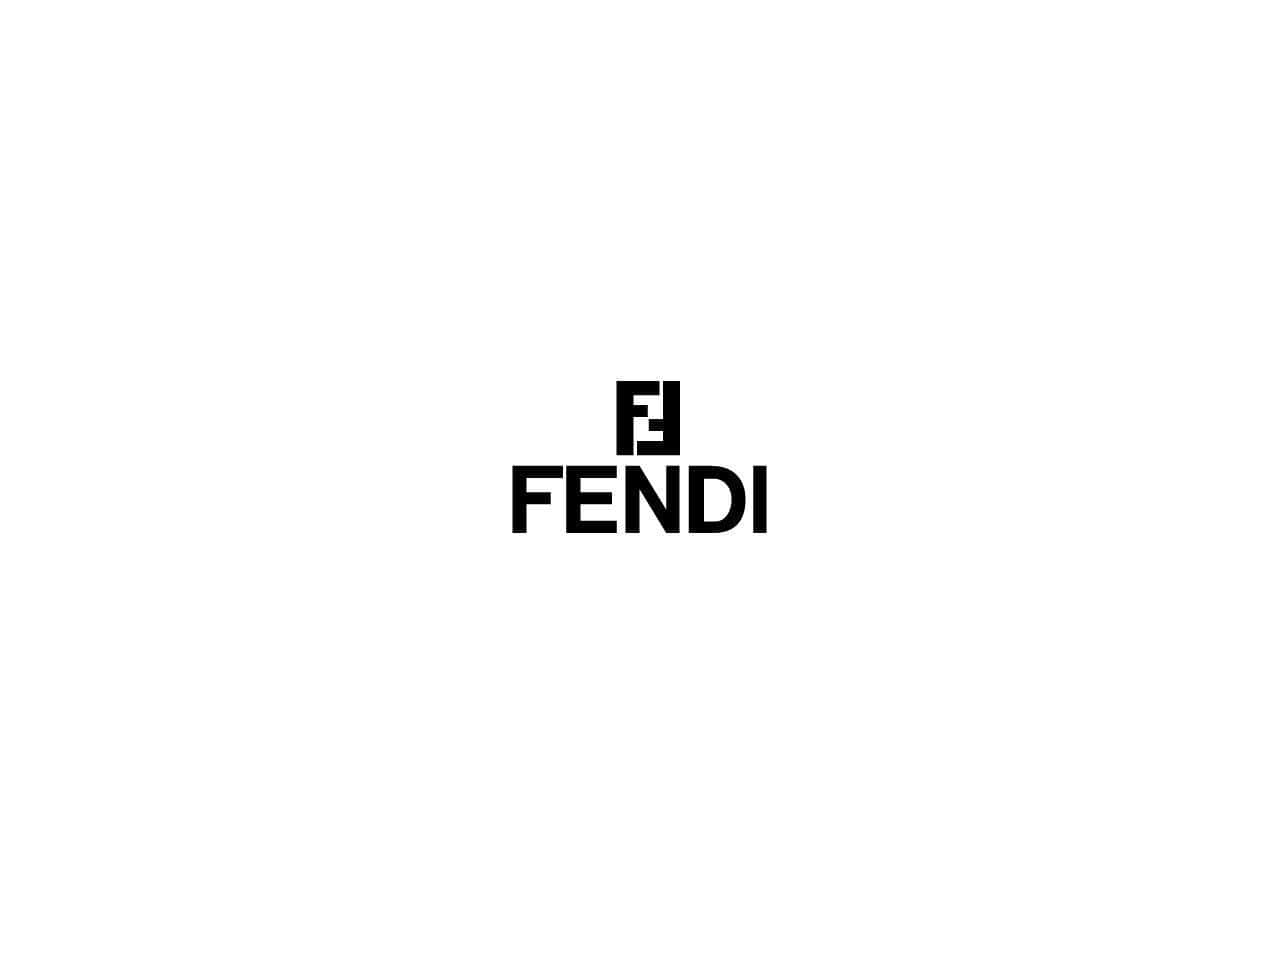 Thissentence Is Not Related To Computer Or Mobile Wallpapers, But Here Is The Translation In Danish Anyway: Klæd Dig Ud I Fendi Til Aftenen!